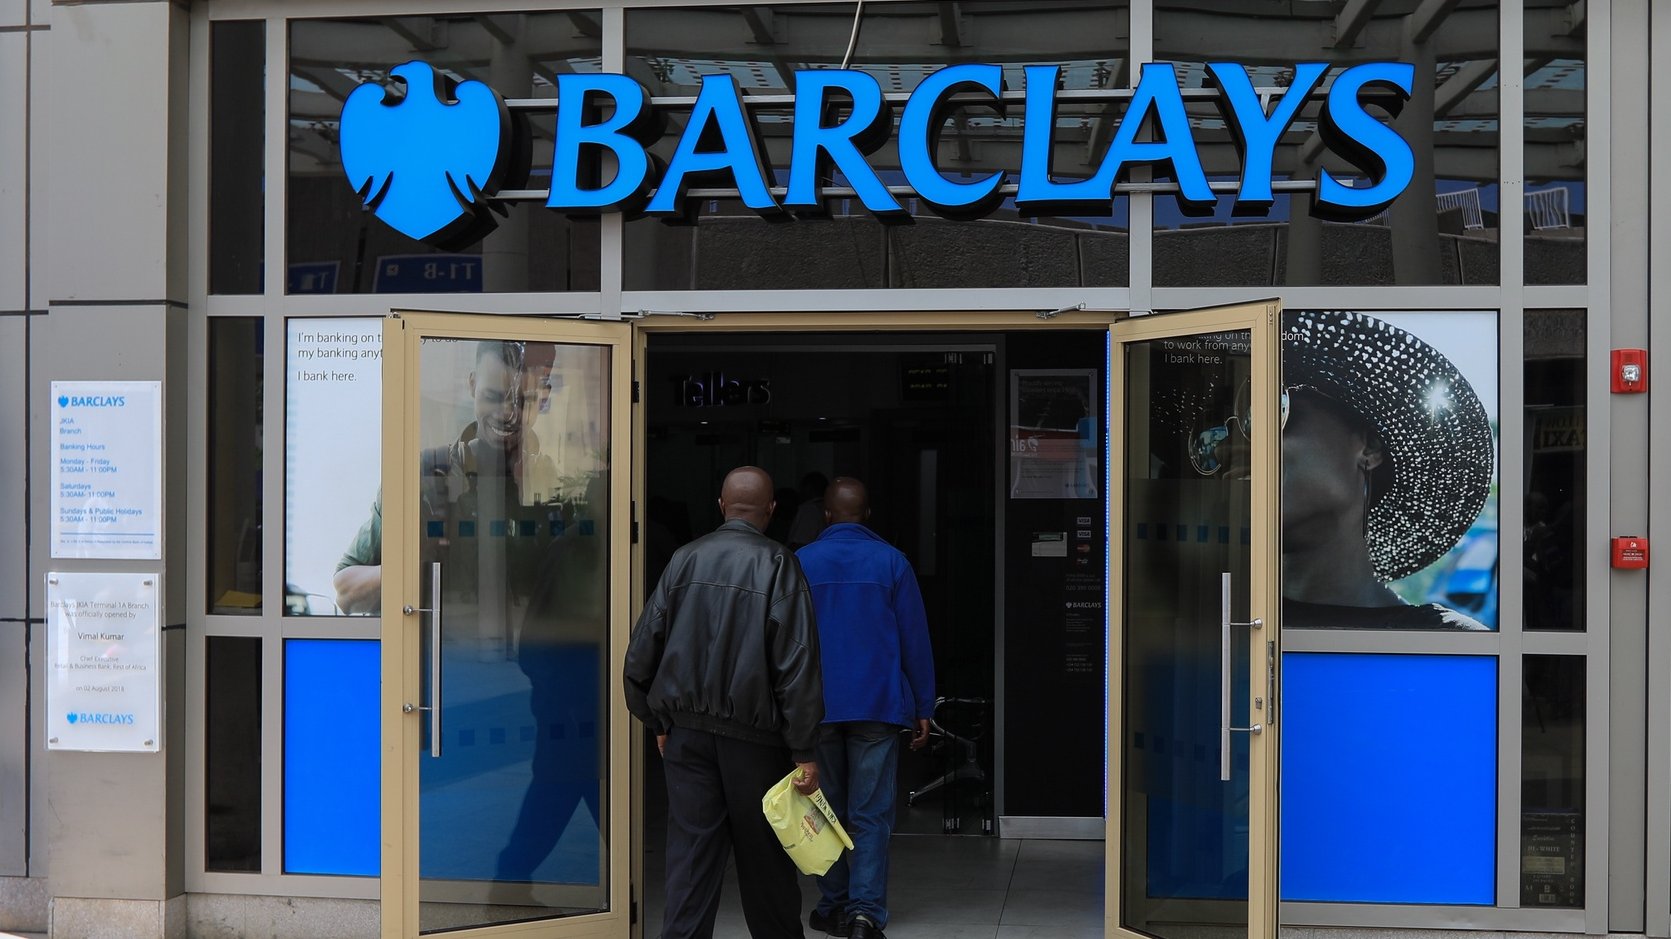 epa08215391 (FILE) - People enter into a Barclays bank branch located at the entrance of one of the international arrivals terminals at the Jomo Kenyatta International Airport (JKIA) in Nairobi, Kenya, 06 March 2019 (reissued 13 February 2020). Barclays on 13 February 2020 released their full year 2019 results, saying the Barclay Group&#039;s total 2019 income was 21,632 million pound, net operating income was 19,720 million pound and profit after tax stood at 3,354 million pound.  EPA/DANIEL IRUNGU *** Local Caption *** 55036163